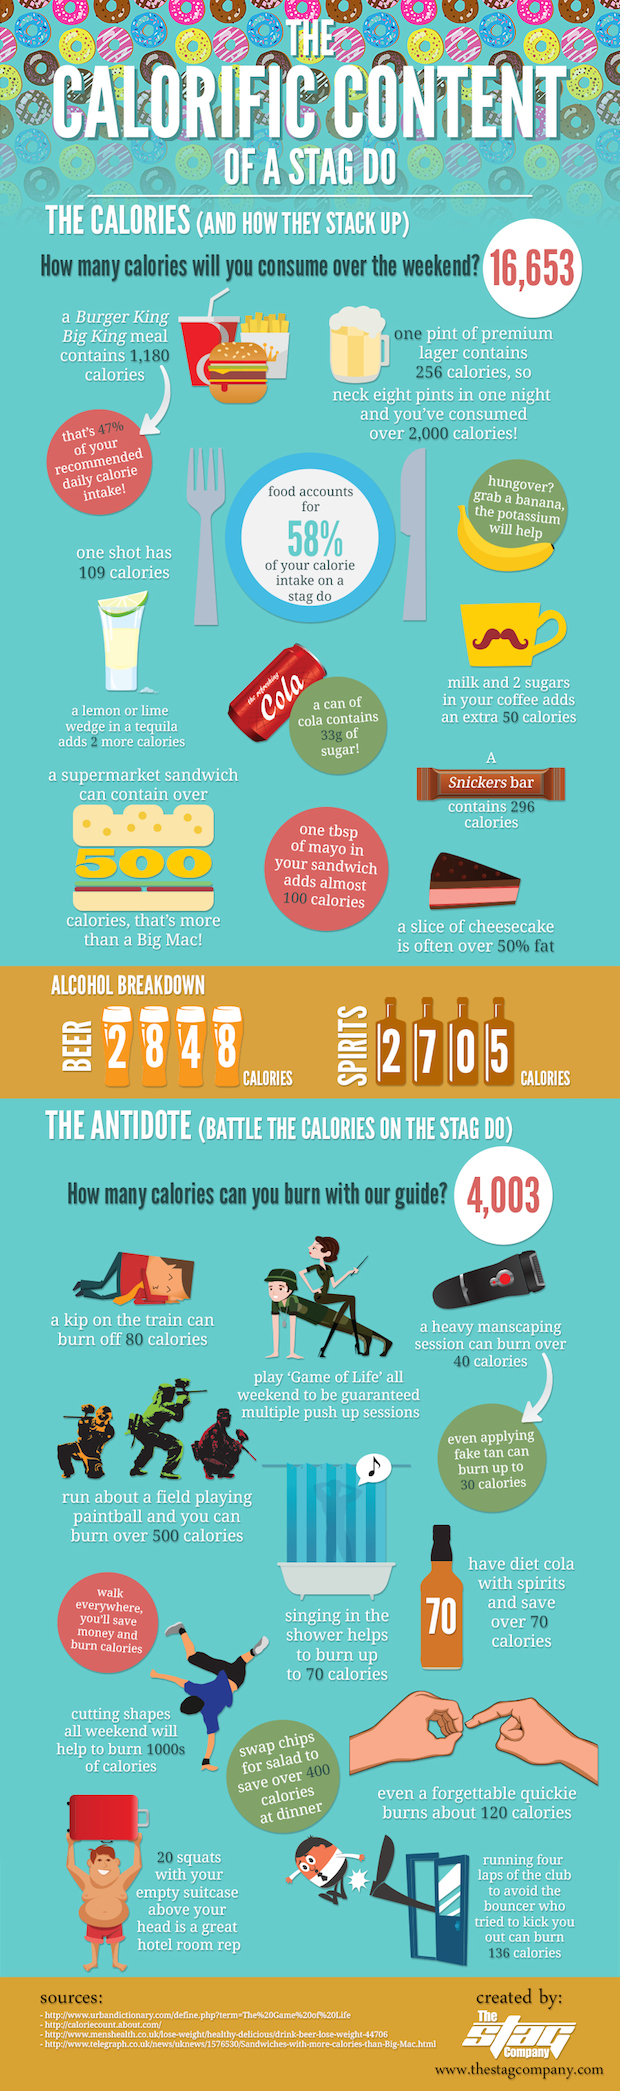 Calorie Intake at a Bachelor Party - Infographic